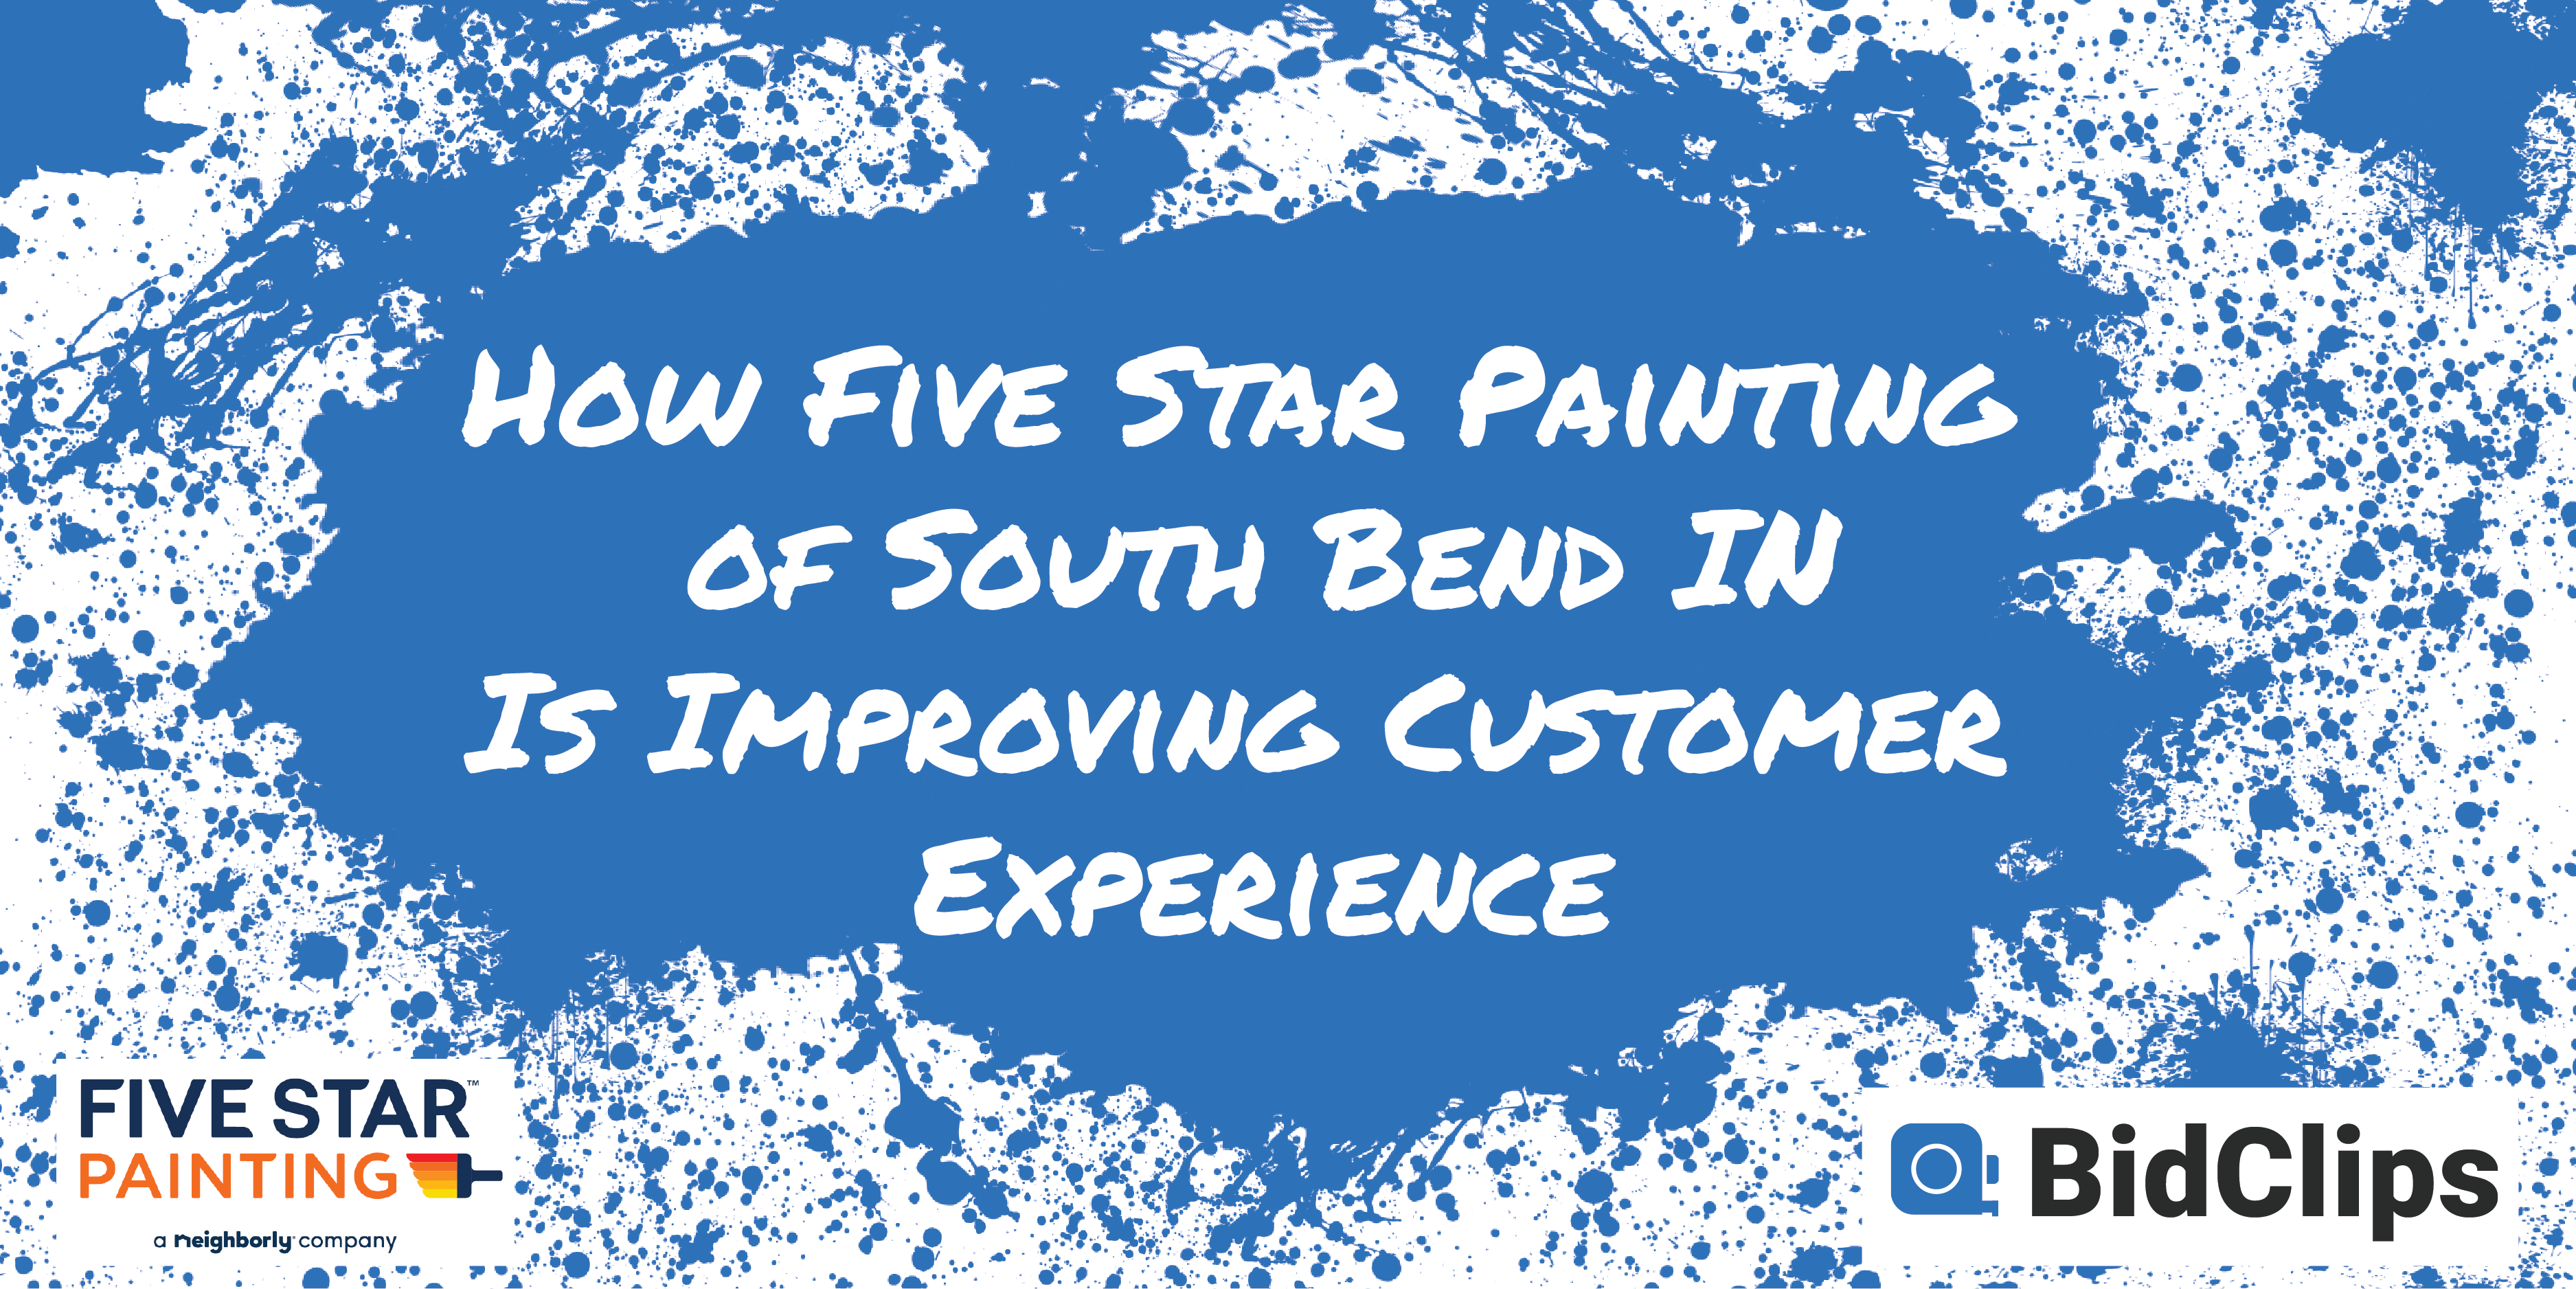 How five star painting of South Bend IN is improving customer experience